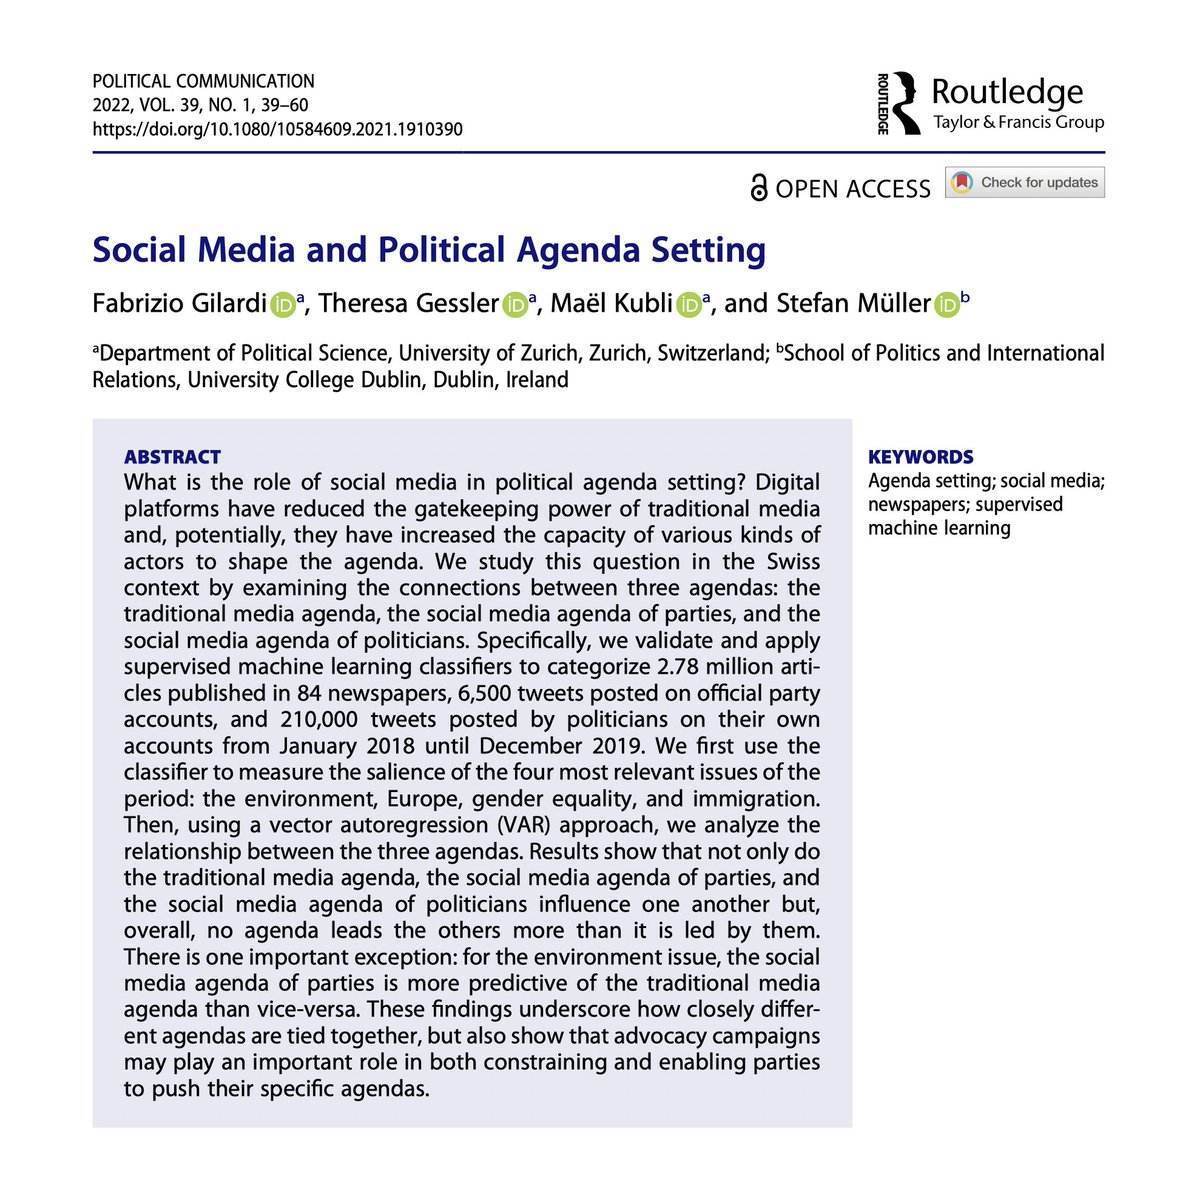 Social Media and Political Agenda Setting Now out in @polcommjournal with ✨page numbers✨ With @th_ges @MaelKubli @ste_mueller #OpenAccess tandfonline.com/doi/full/10.10…